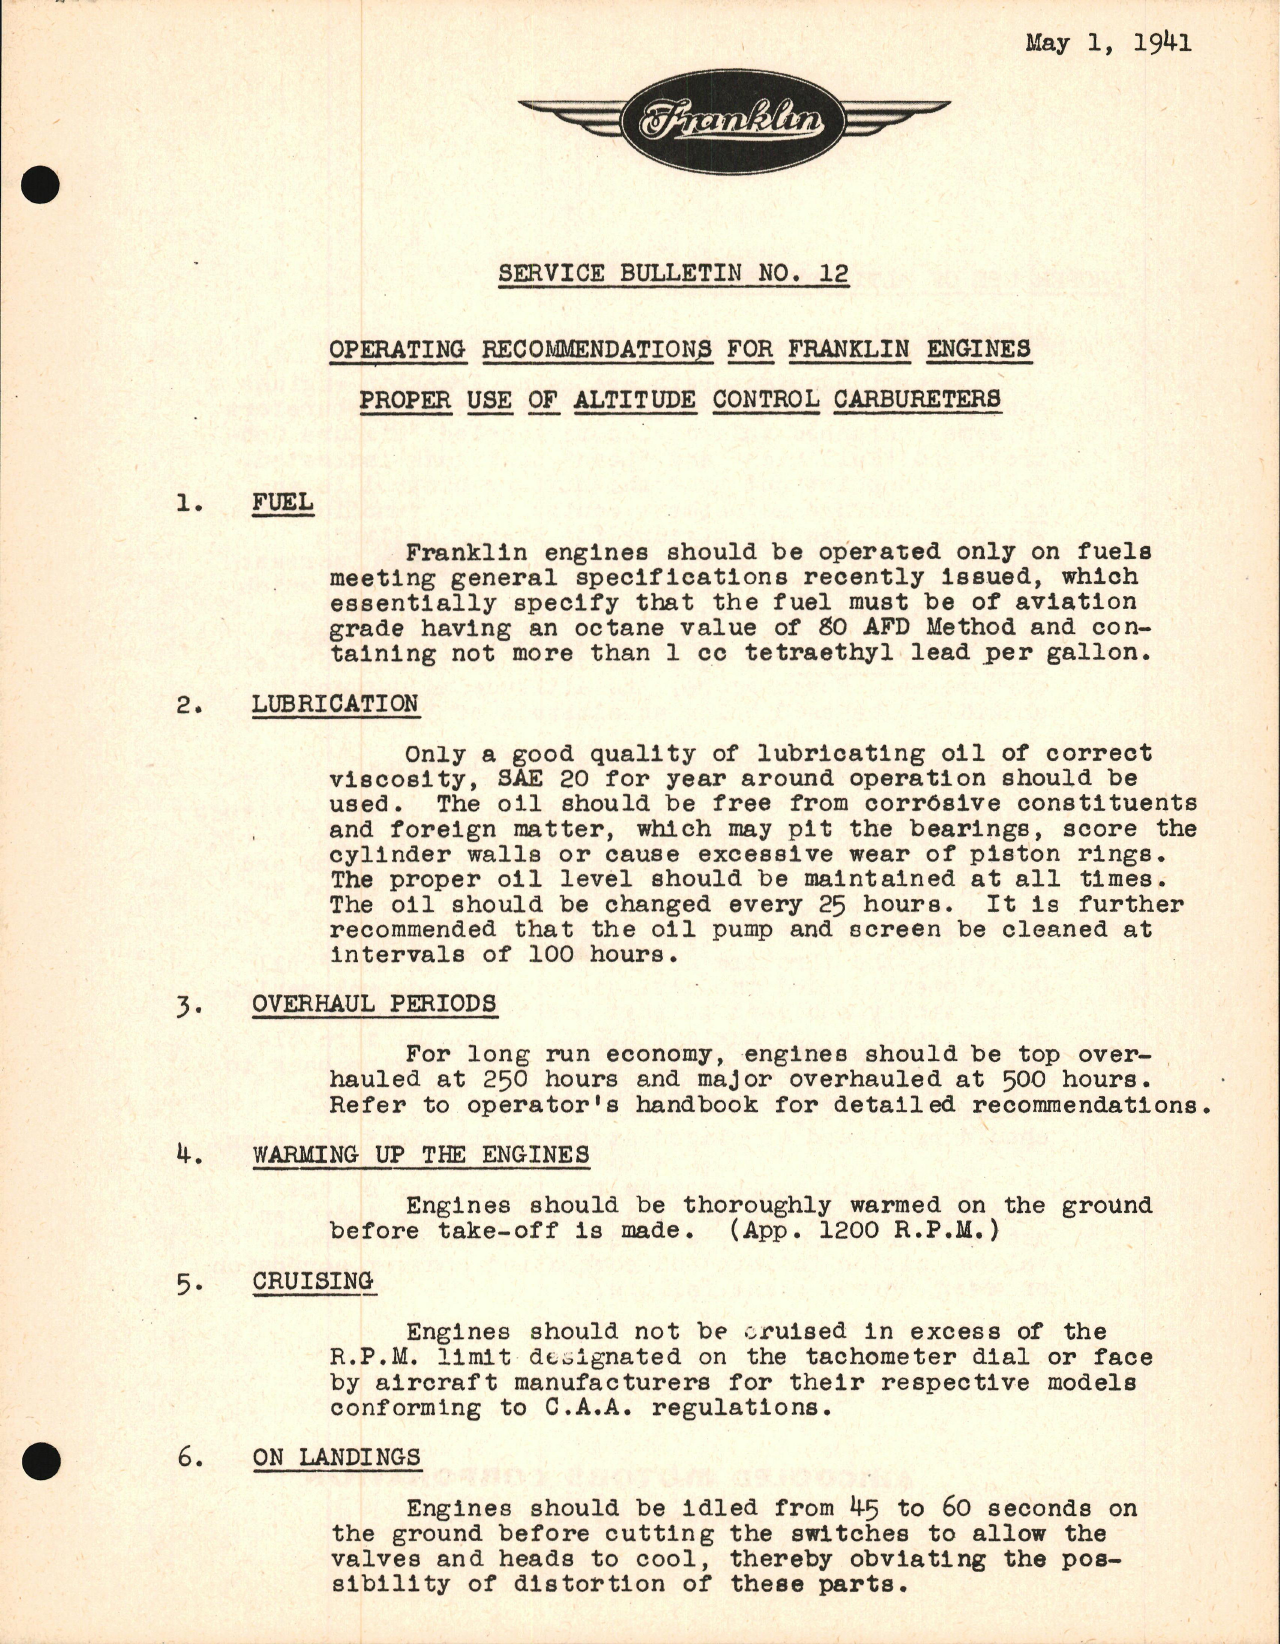 Sample page 1 from AirCorps Library document: Operating Recommendations for Proper Use of Altitude Control Carburetors